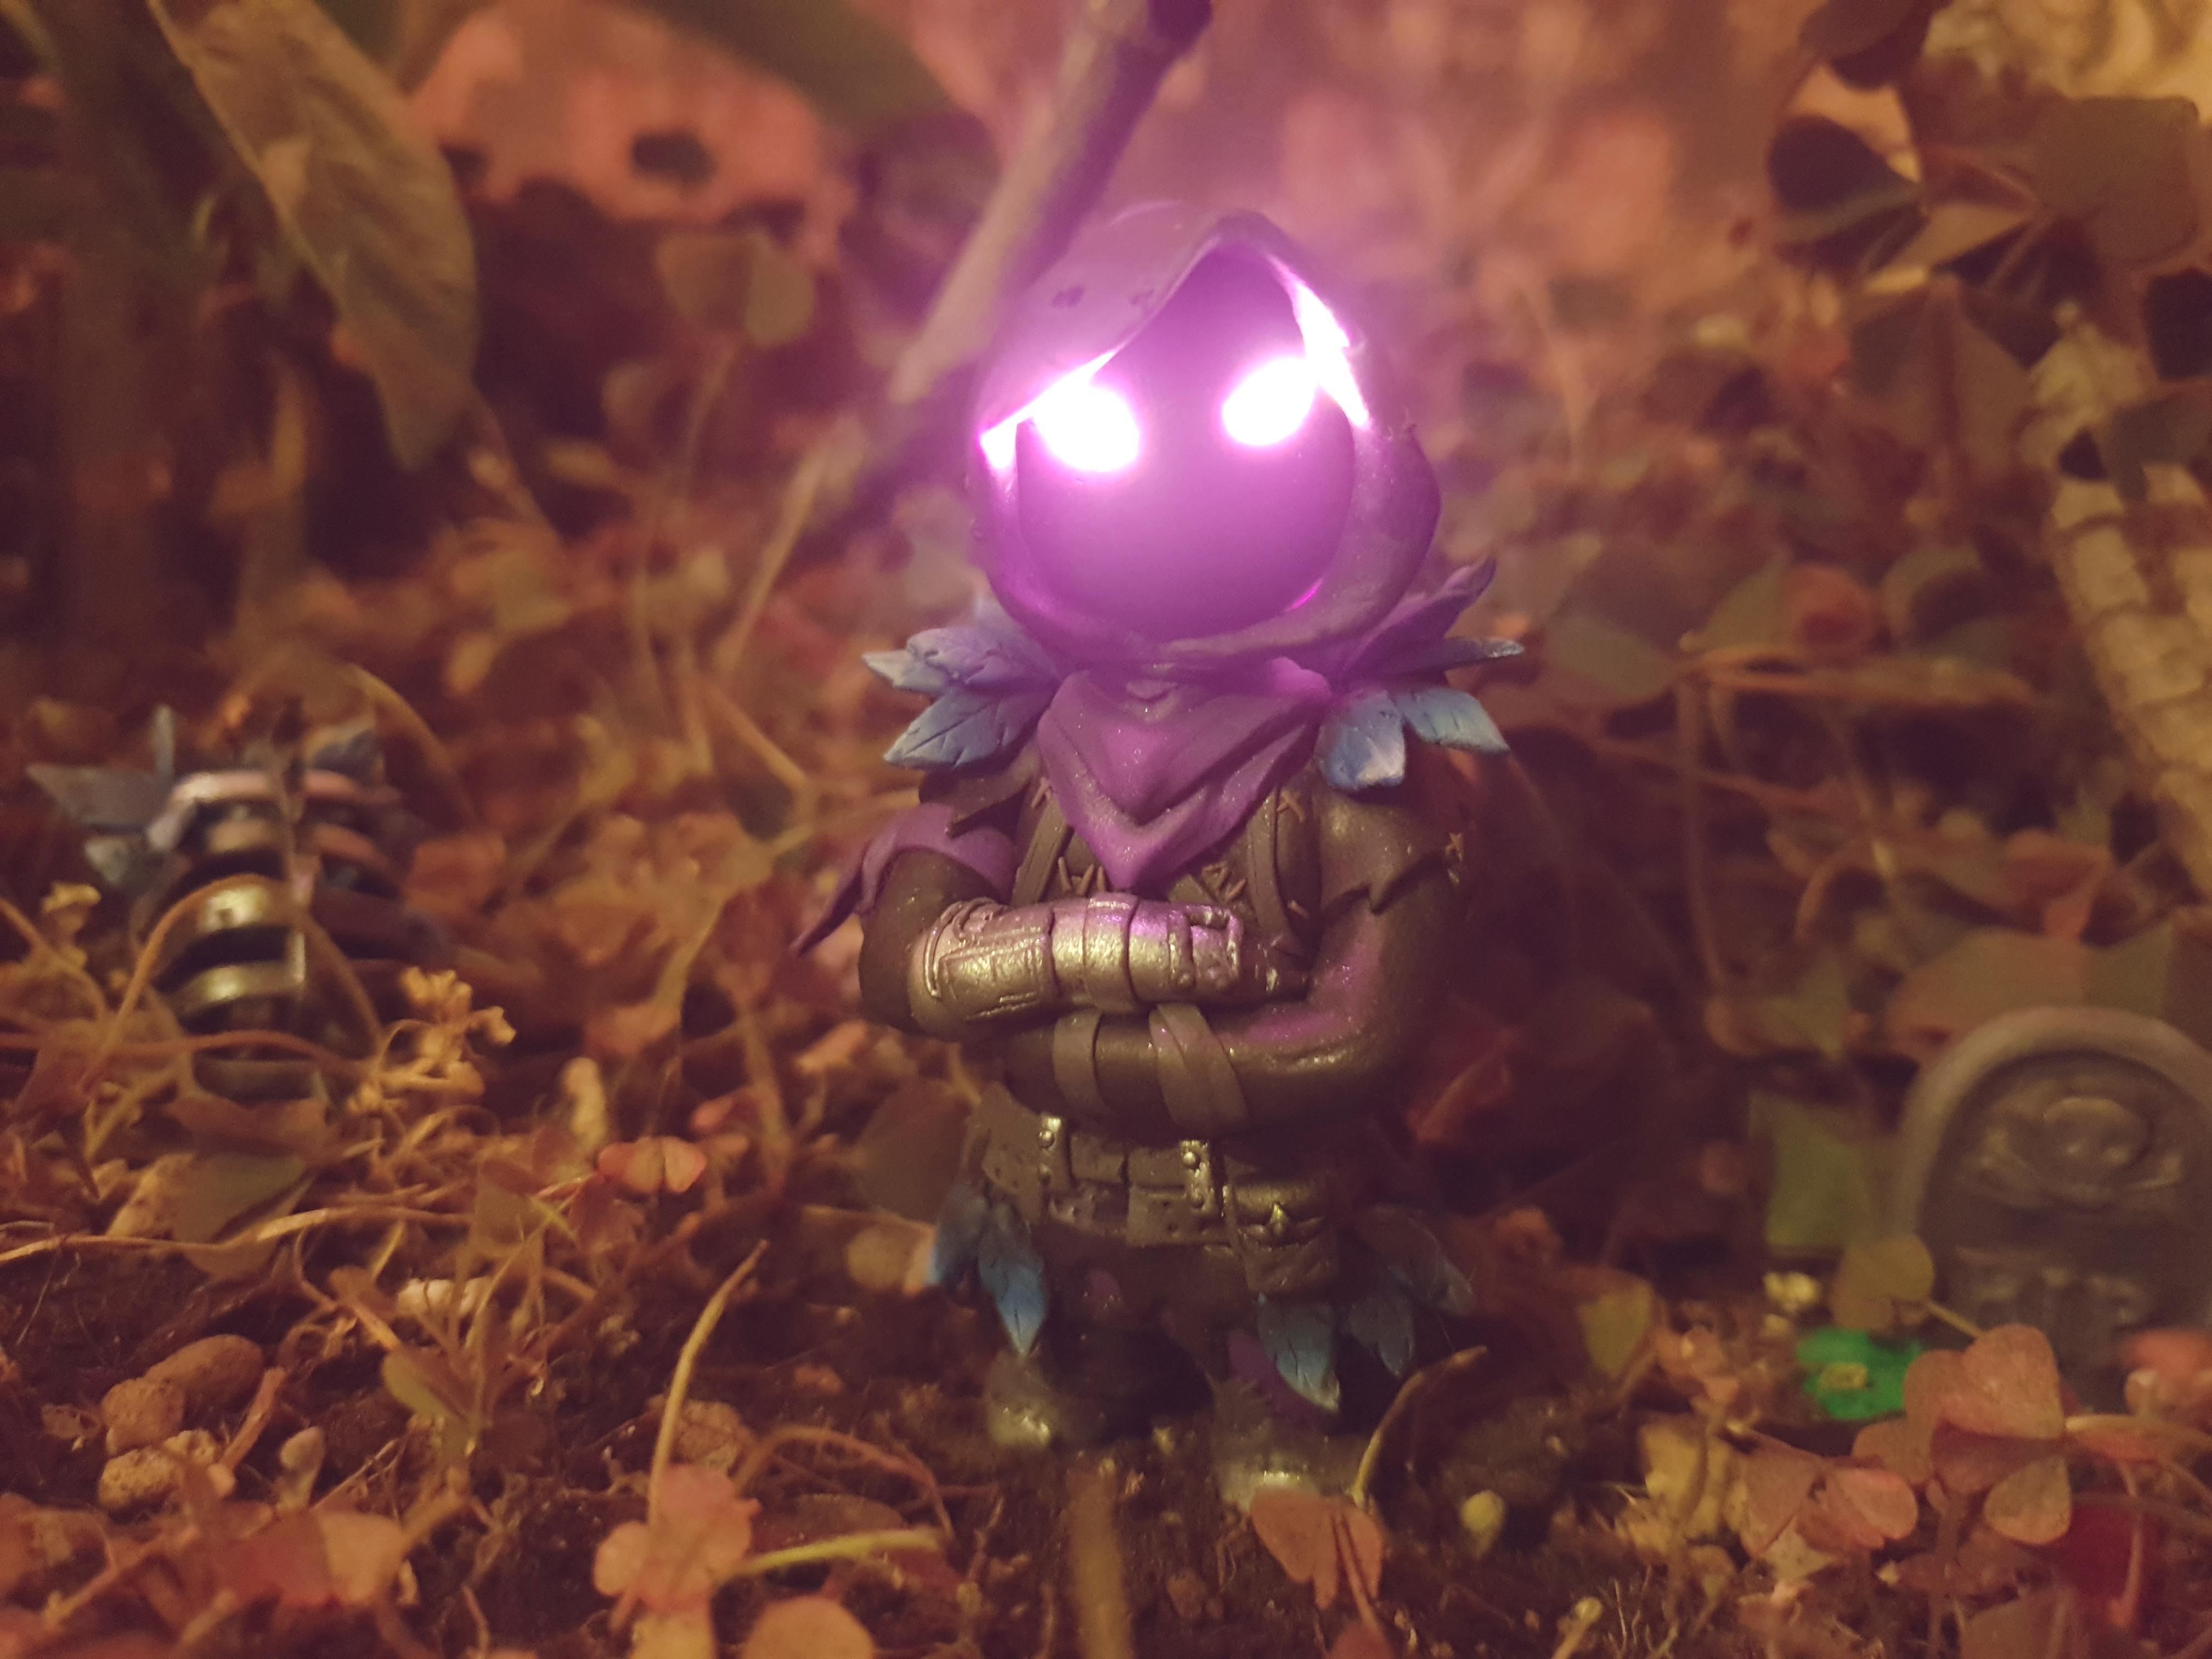 I made this clay Raven from Fortnite!